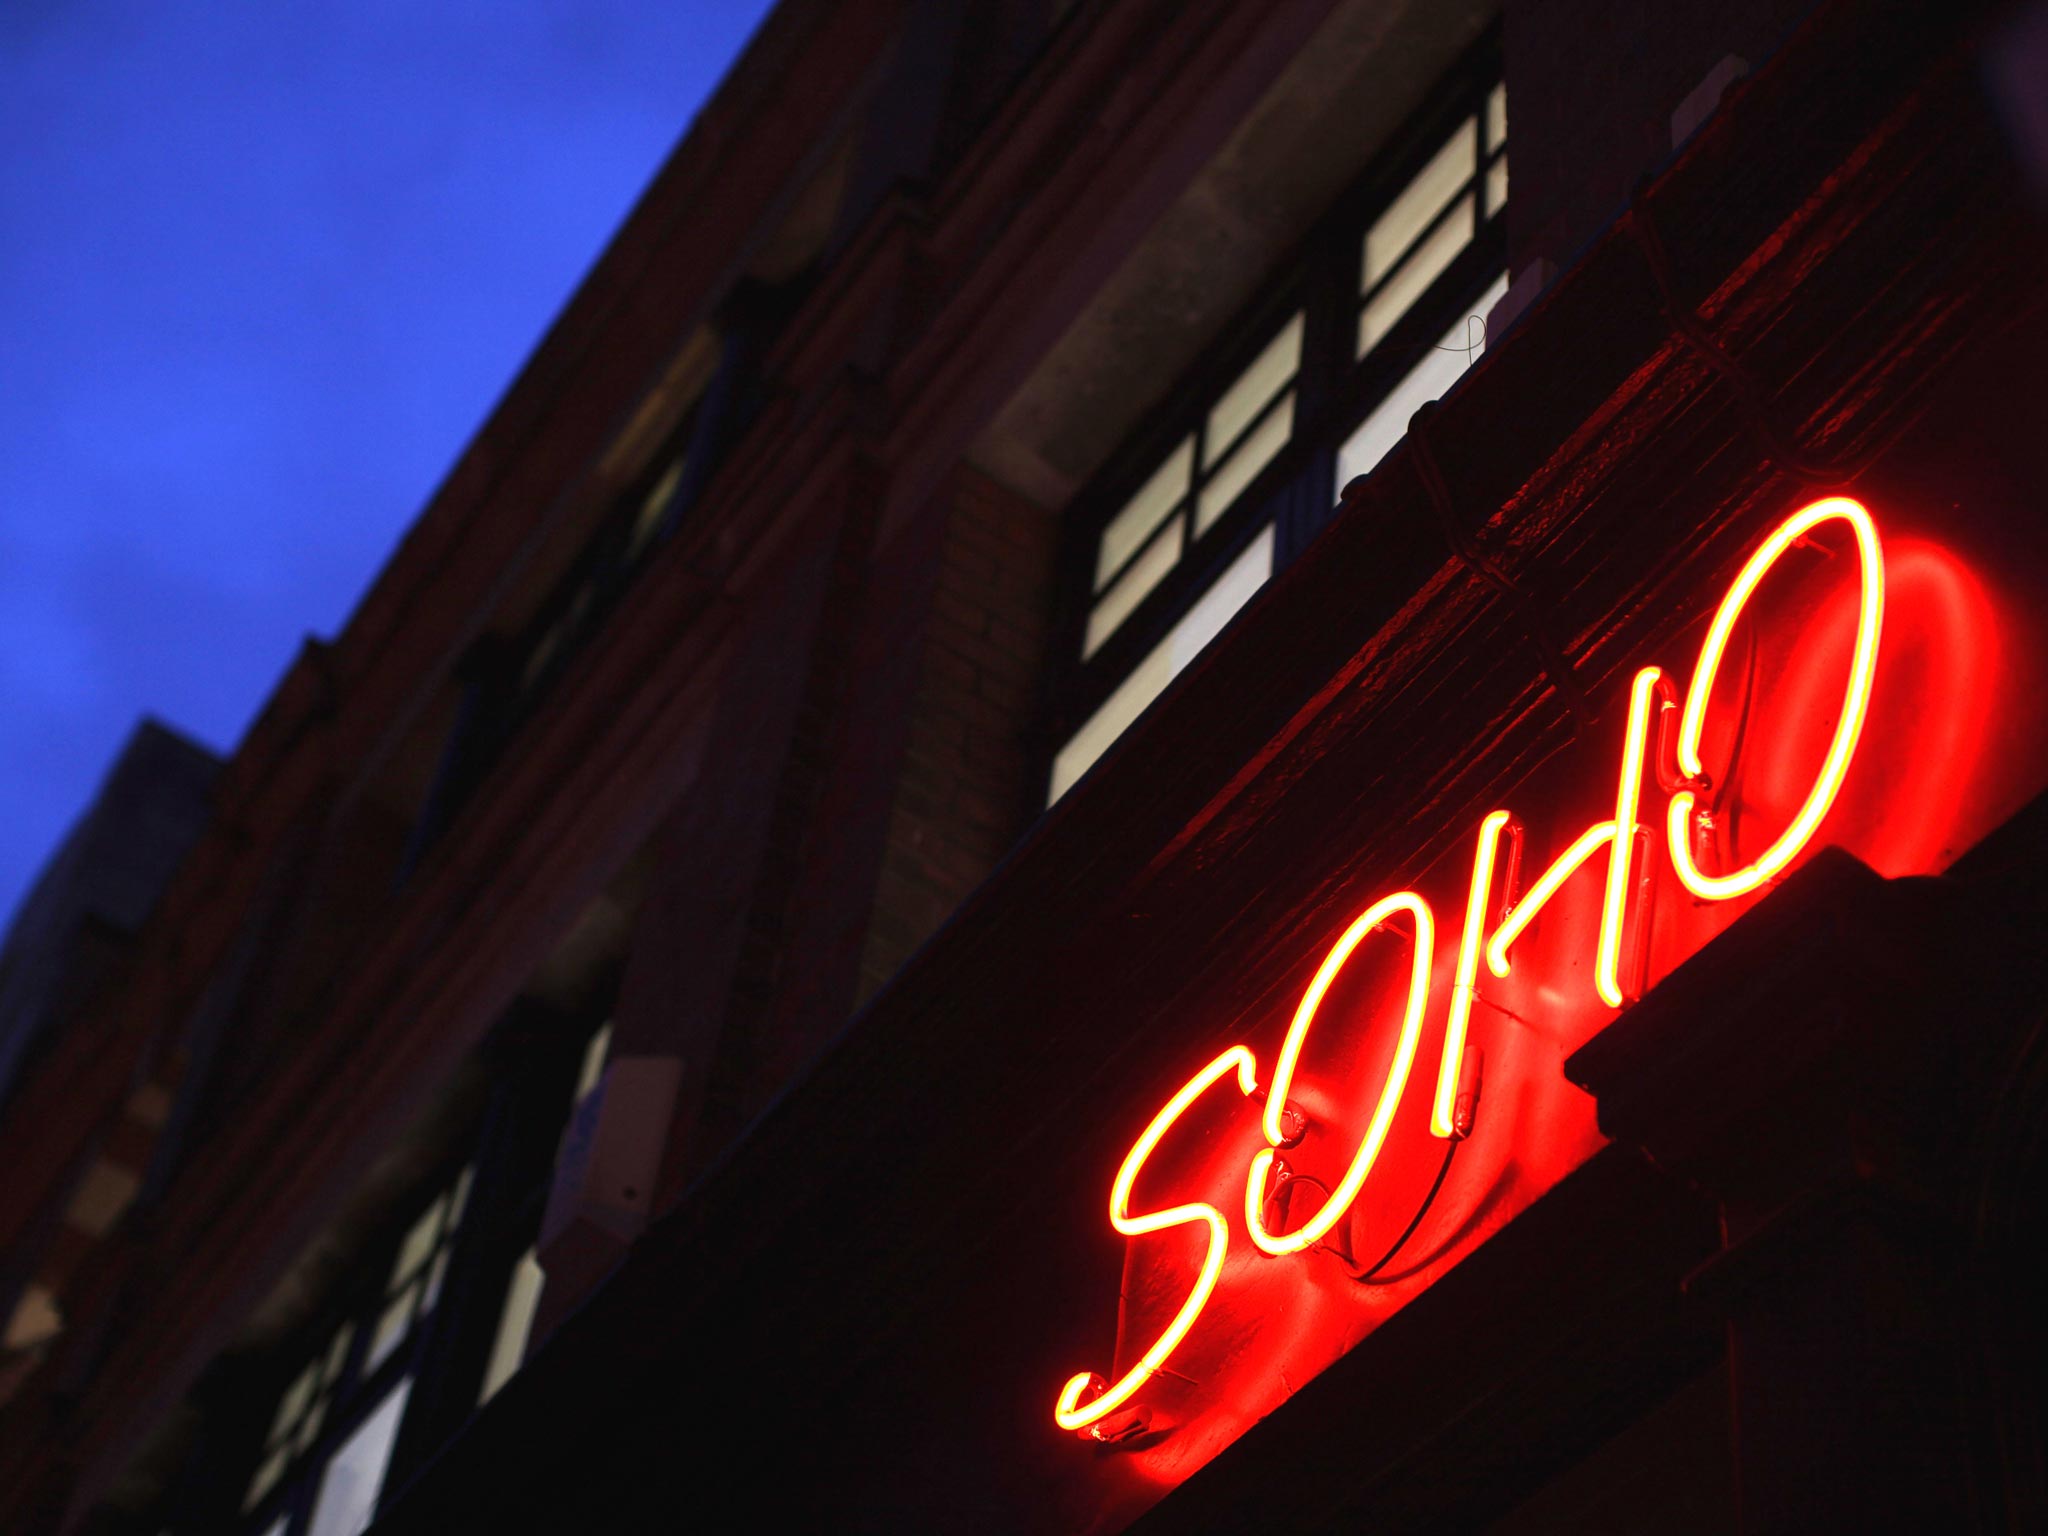 Activists claim that Soho is one of the safest places for prostitutes to work